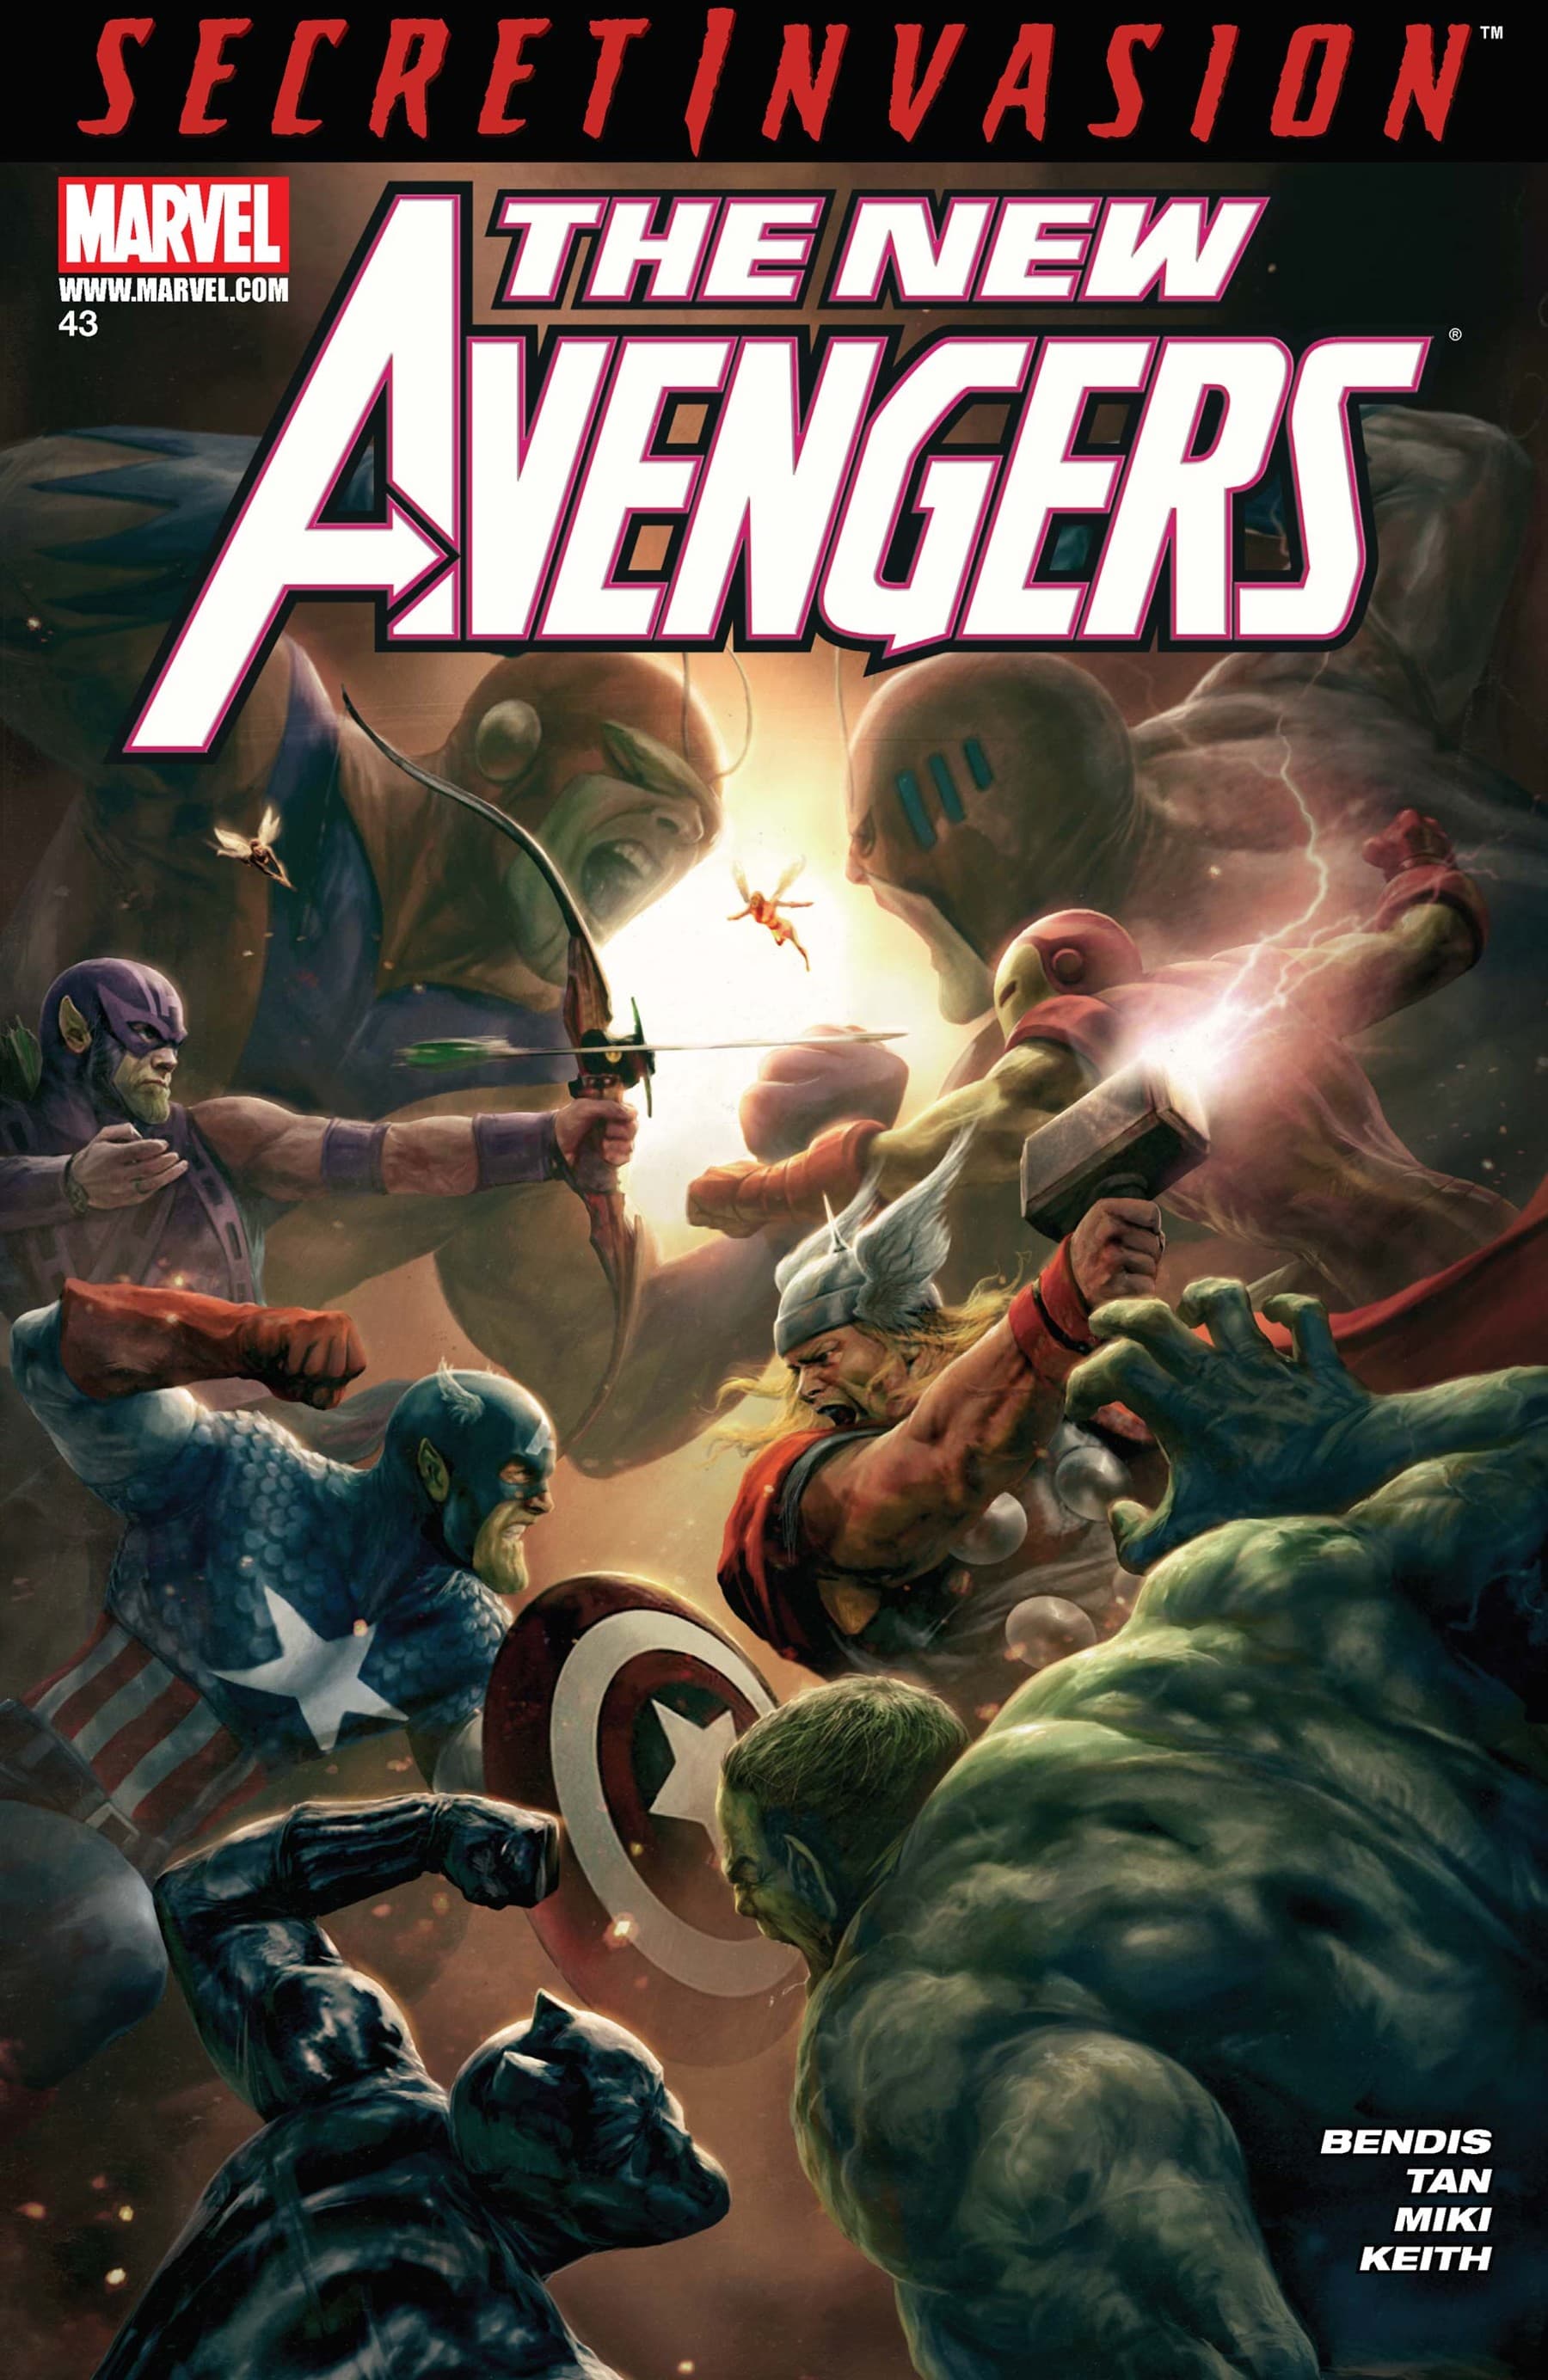 NEW AVENGERS (2004) #43 cover by Aleksi Briclot